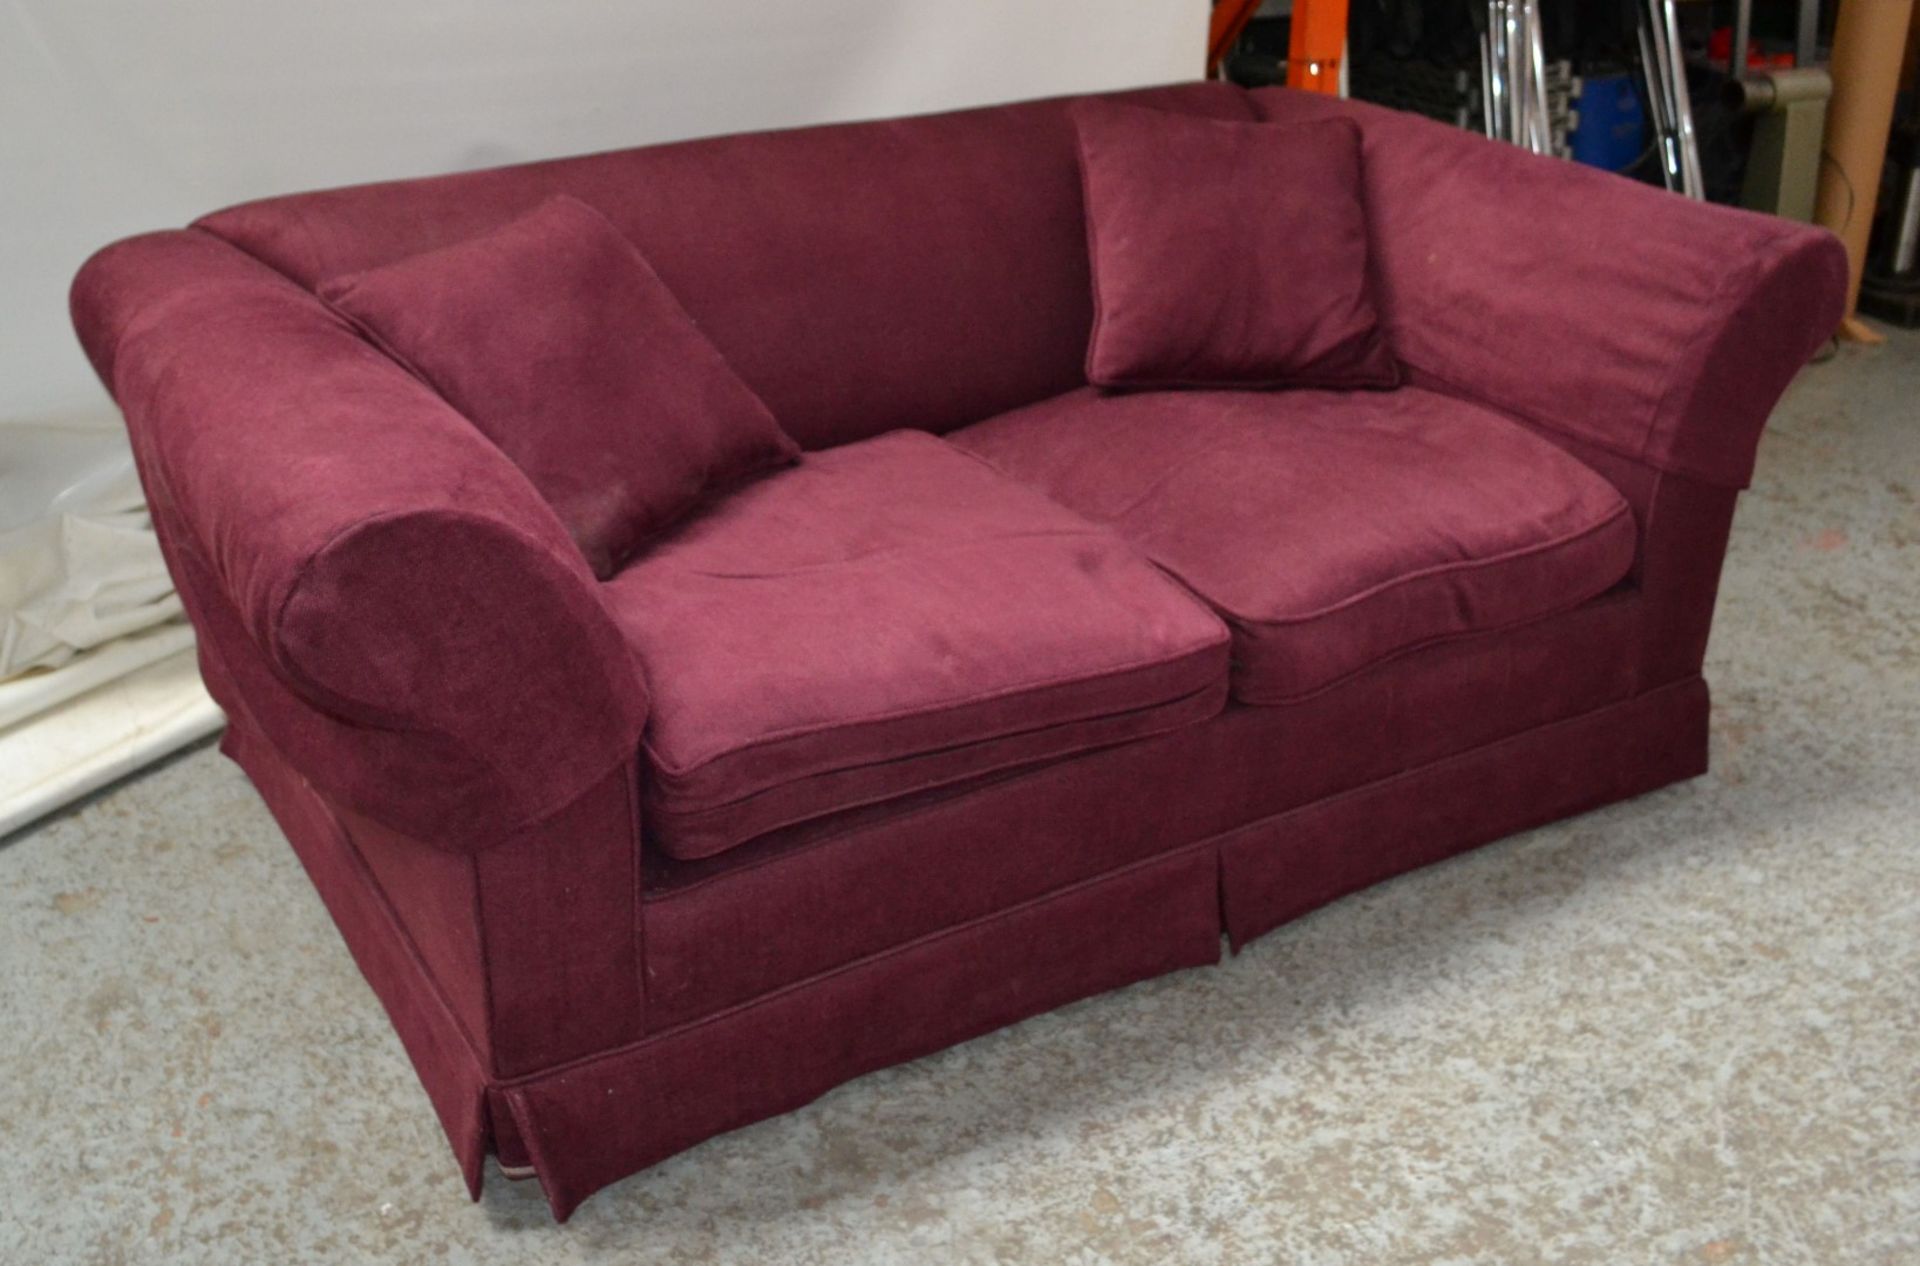 1 x Large Purple Sofa With Arm Covers - CL314 - Location: Altrincham WA14 - *NO VAT On Hammer*<B - Image 6 of 9